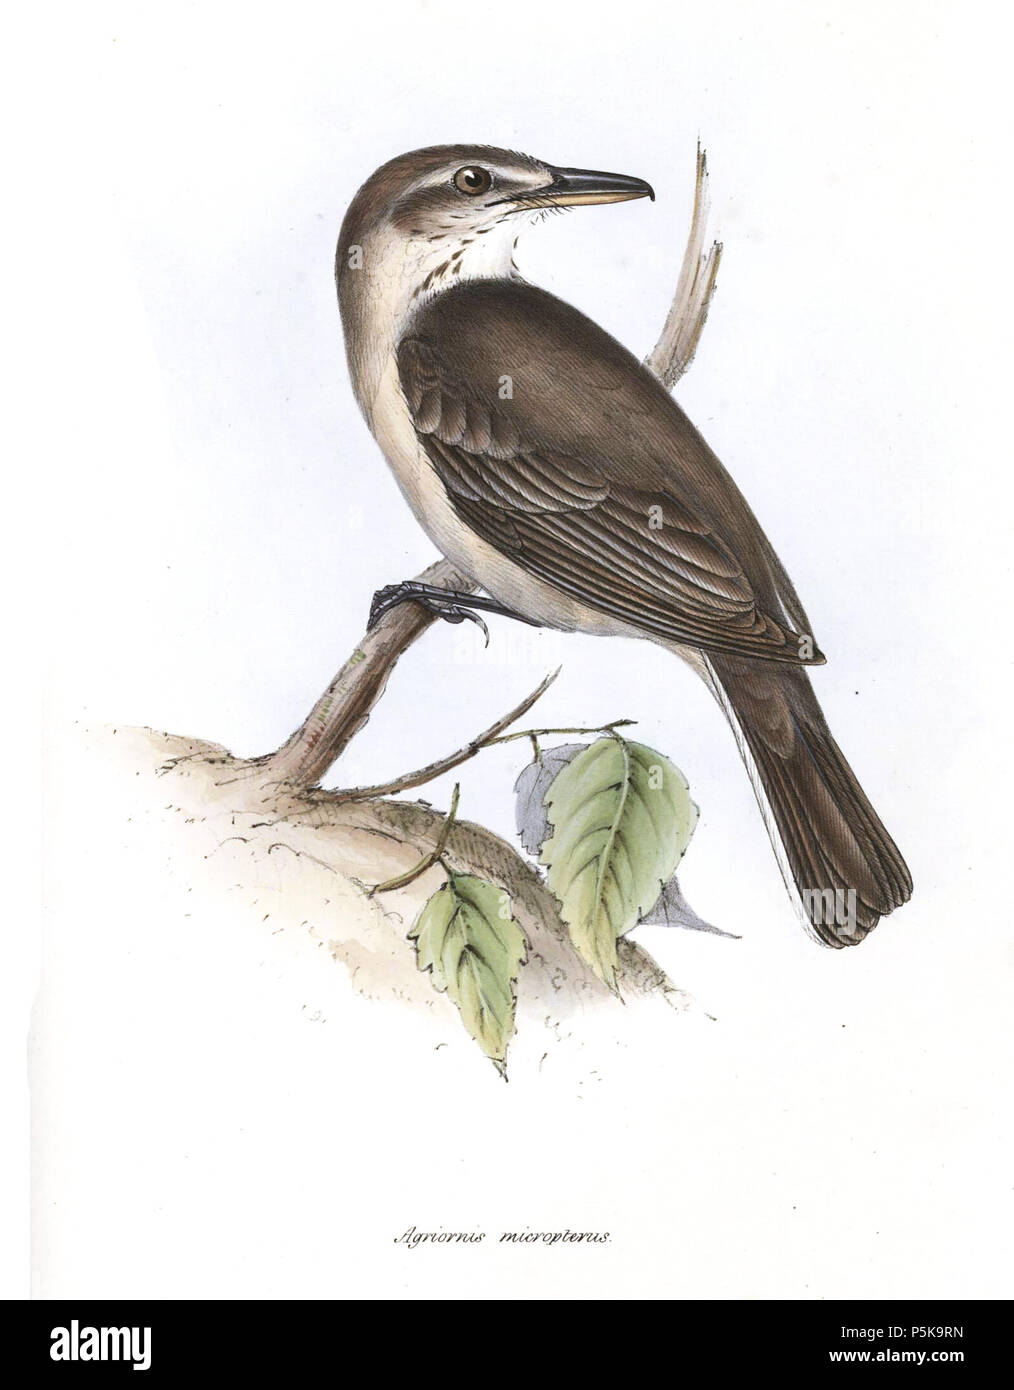 N/A. Grey-bellied Shrike-tyrant (Agriornis micropterus) . 1839.   John Gould  (1804–1881)      Alternative names Gould  Description British zoologist  Date of birth/death 14 September 1804 2 March 1881  Location of birth/death Lyme Regis London  Authority control  : Q313787 VIAF:29597222 ISNI:0000 0001 2125 9888 ULAN:500006638 LCCN:n79100355 NLA:35137514 WorldCat 69 Agriornis micropterus Stock Photo